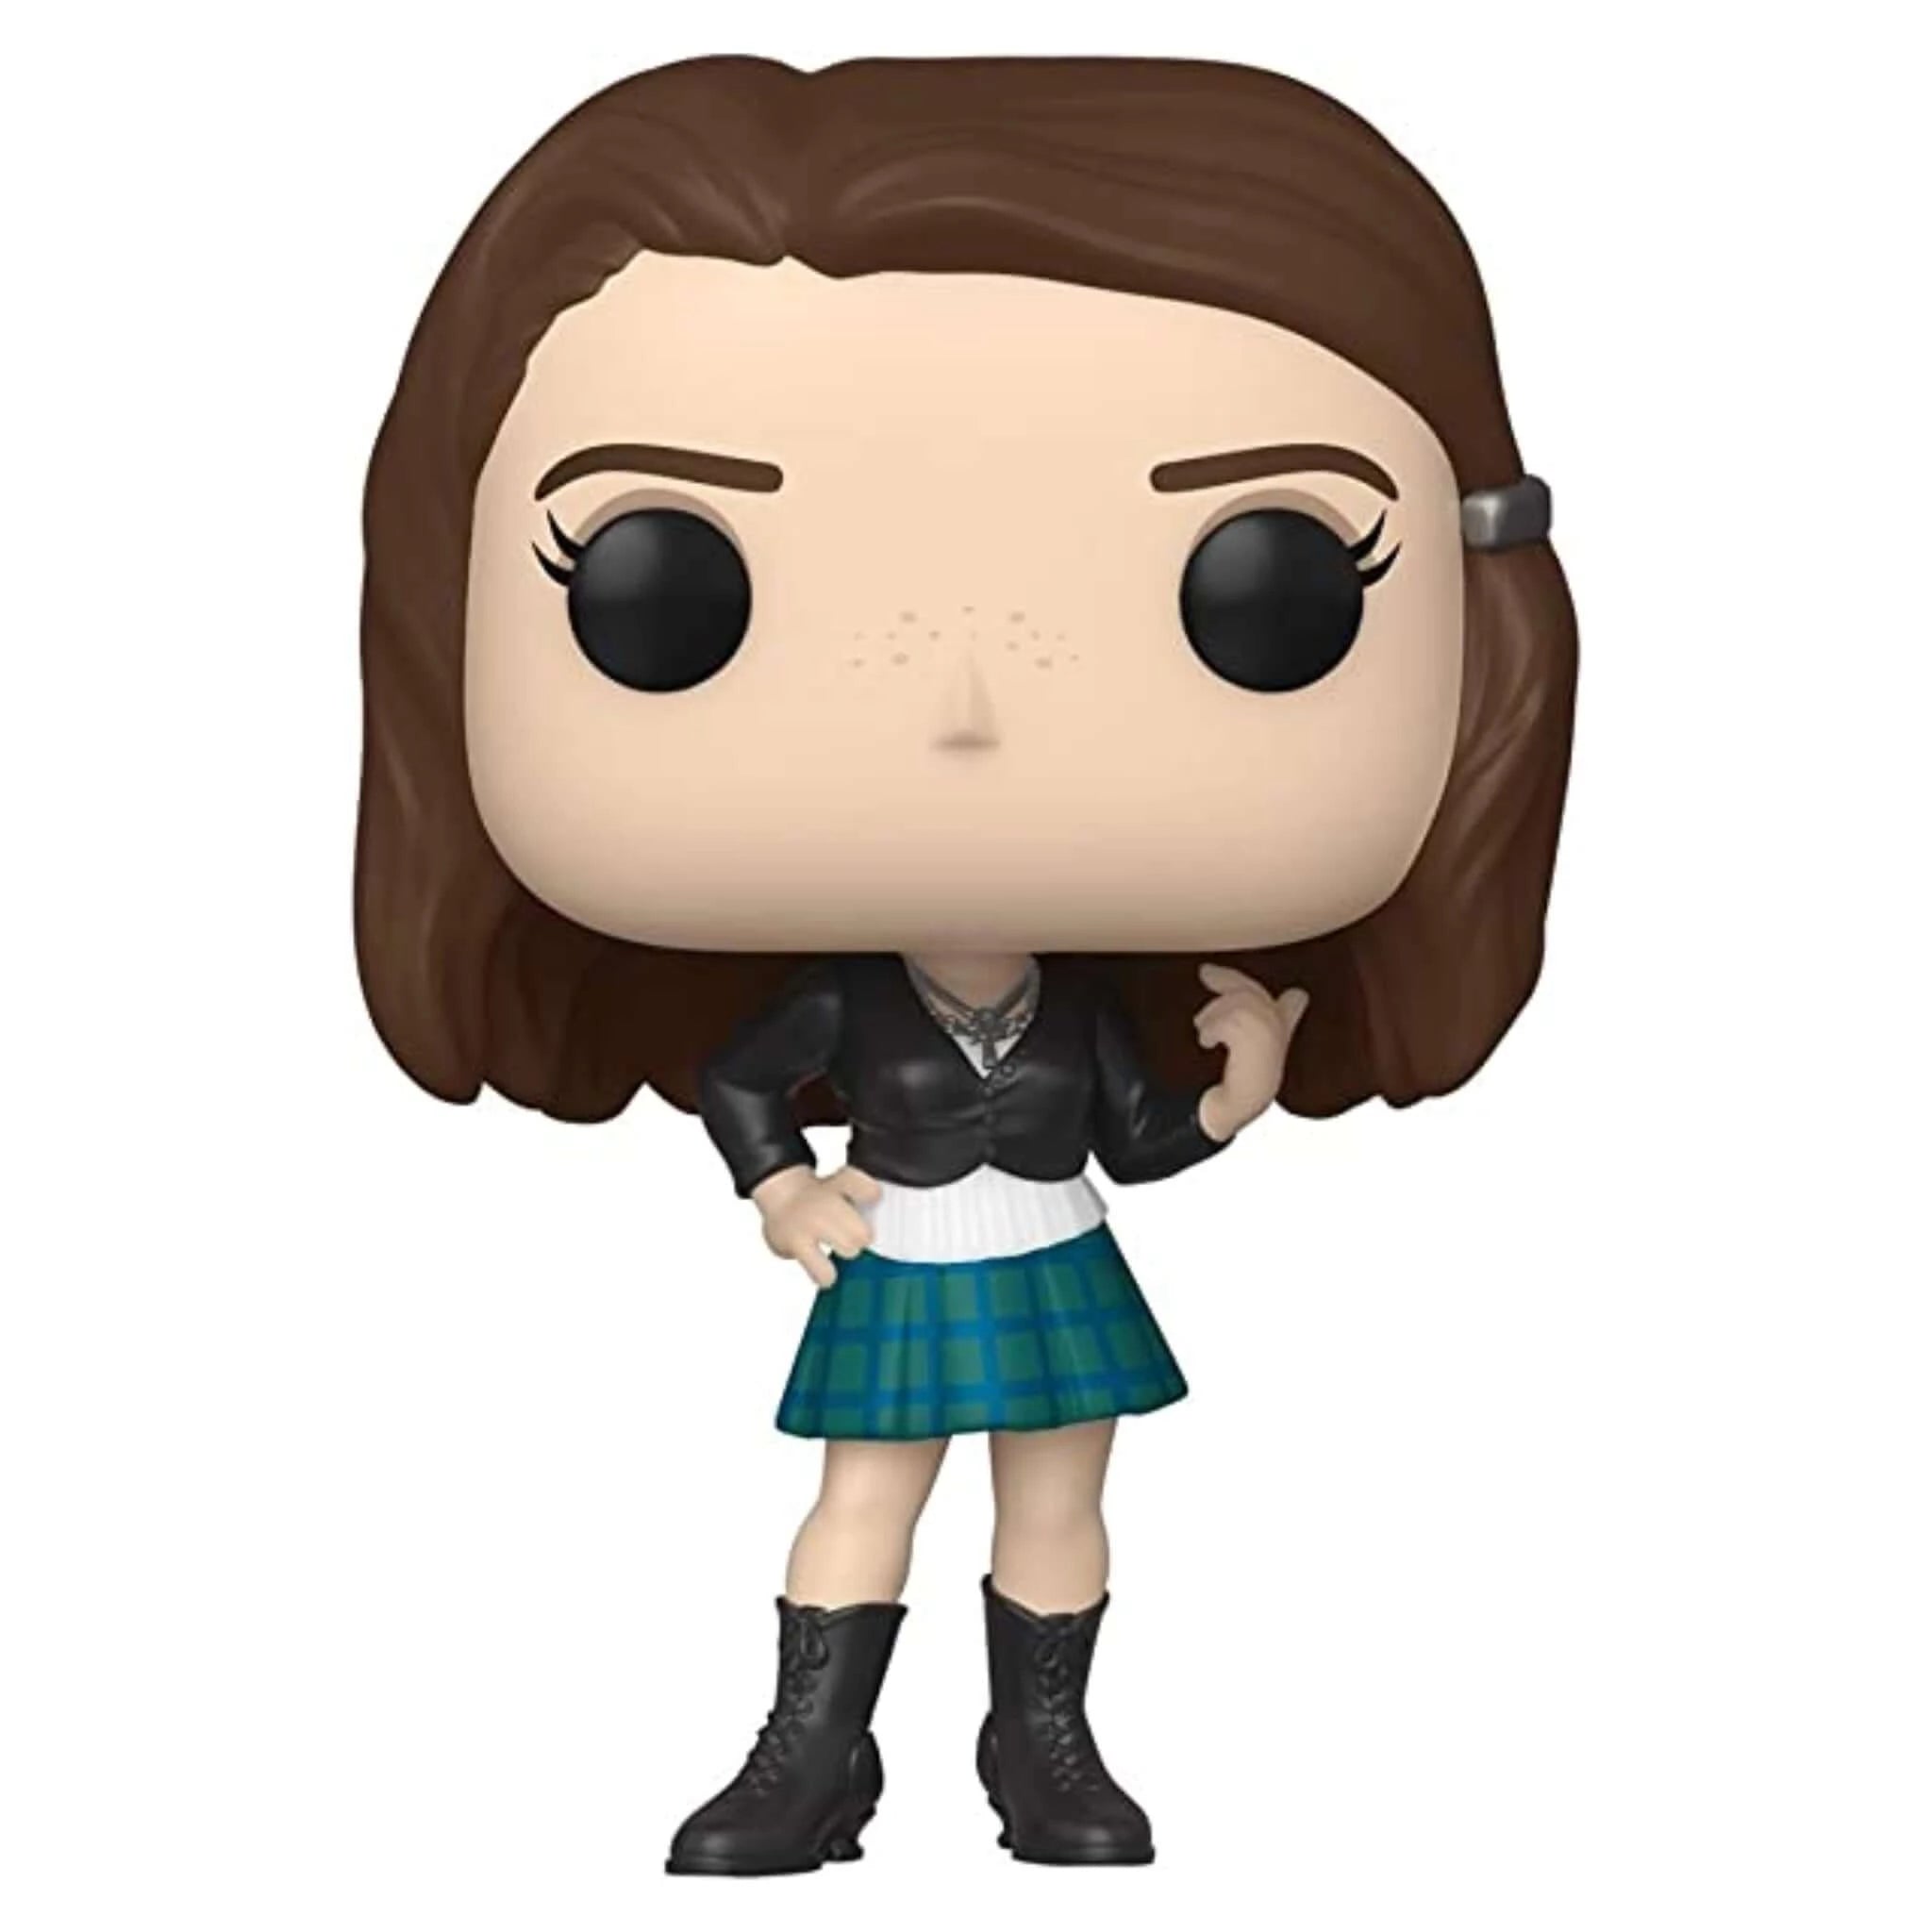 Bonnie Funko Pop! (Signed by Neve Campbell)